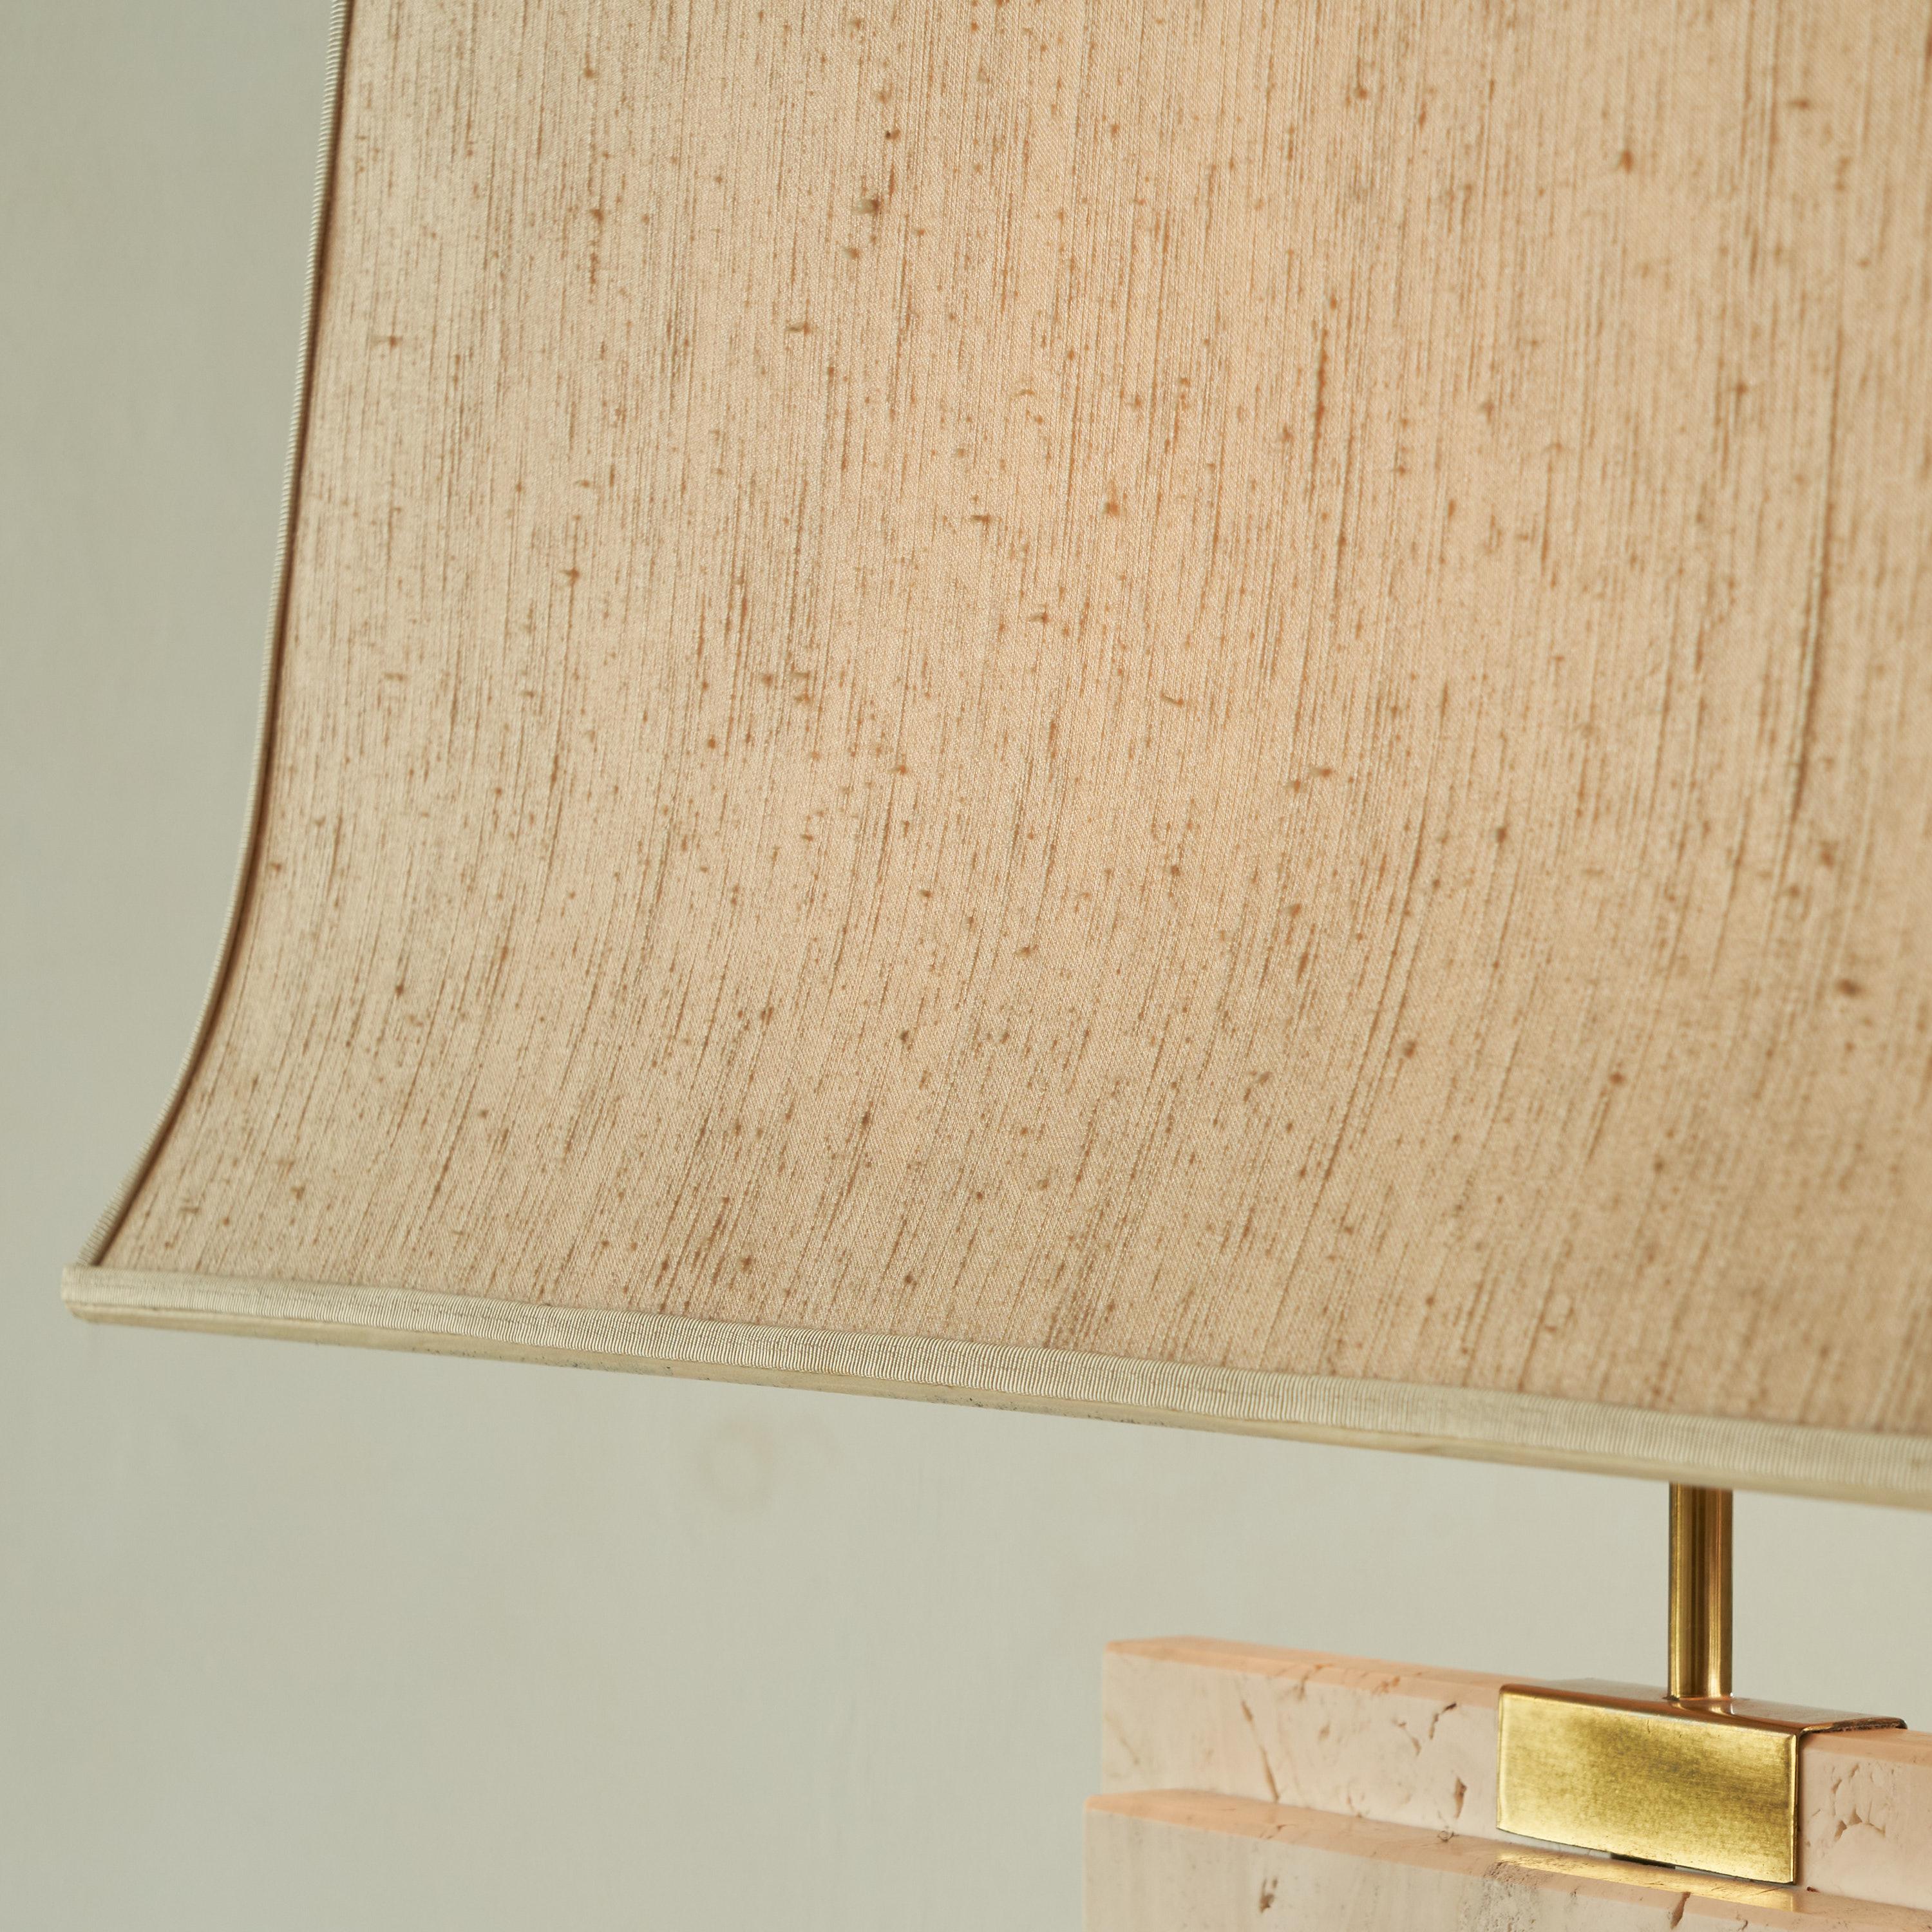 Architectural Table Lamp in Travertine and Brass, Belgium, 1970s For Sale 3